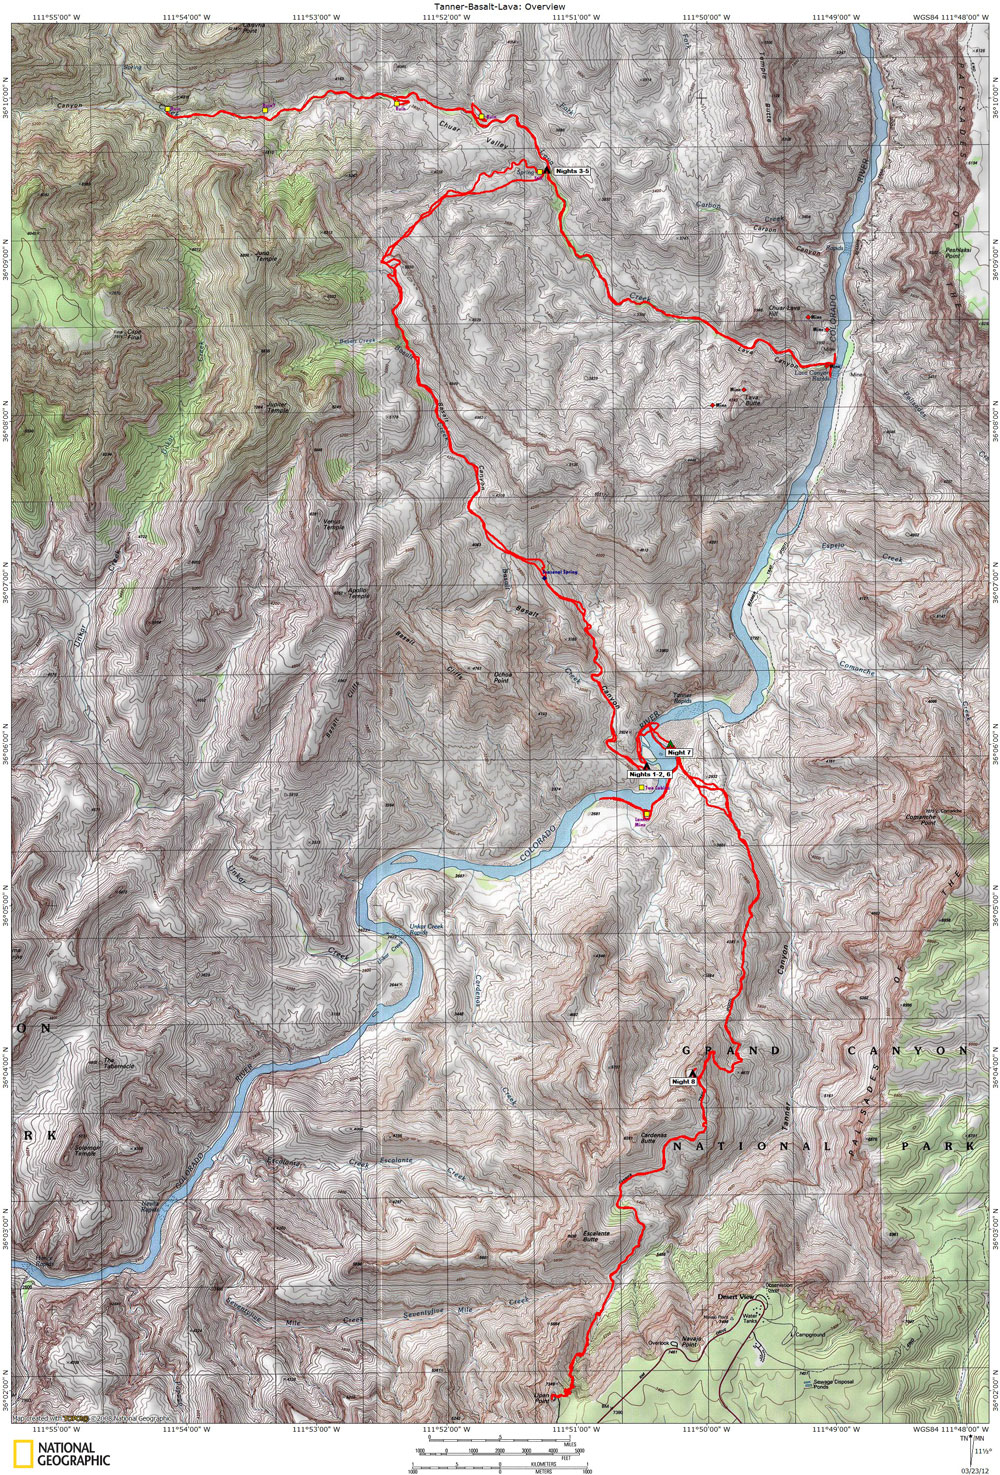 Map of The Tanner-Basalt-Lava Route